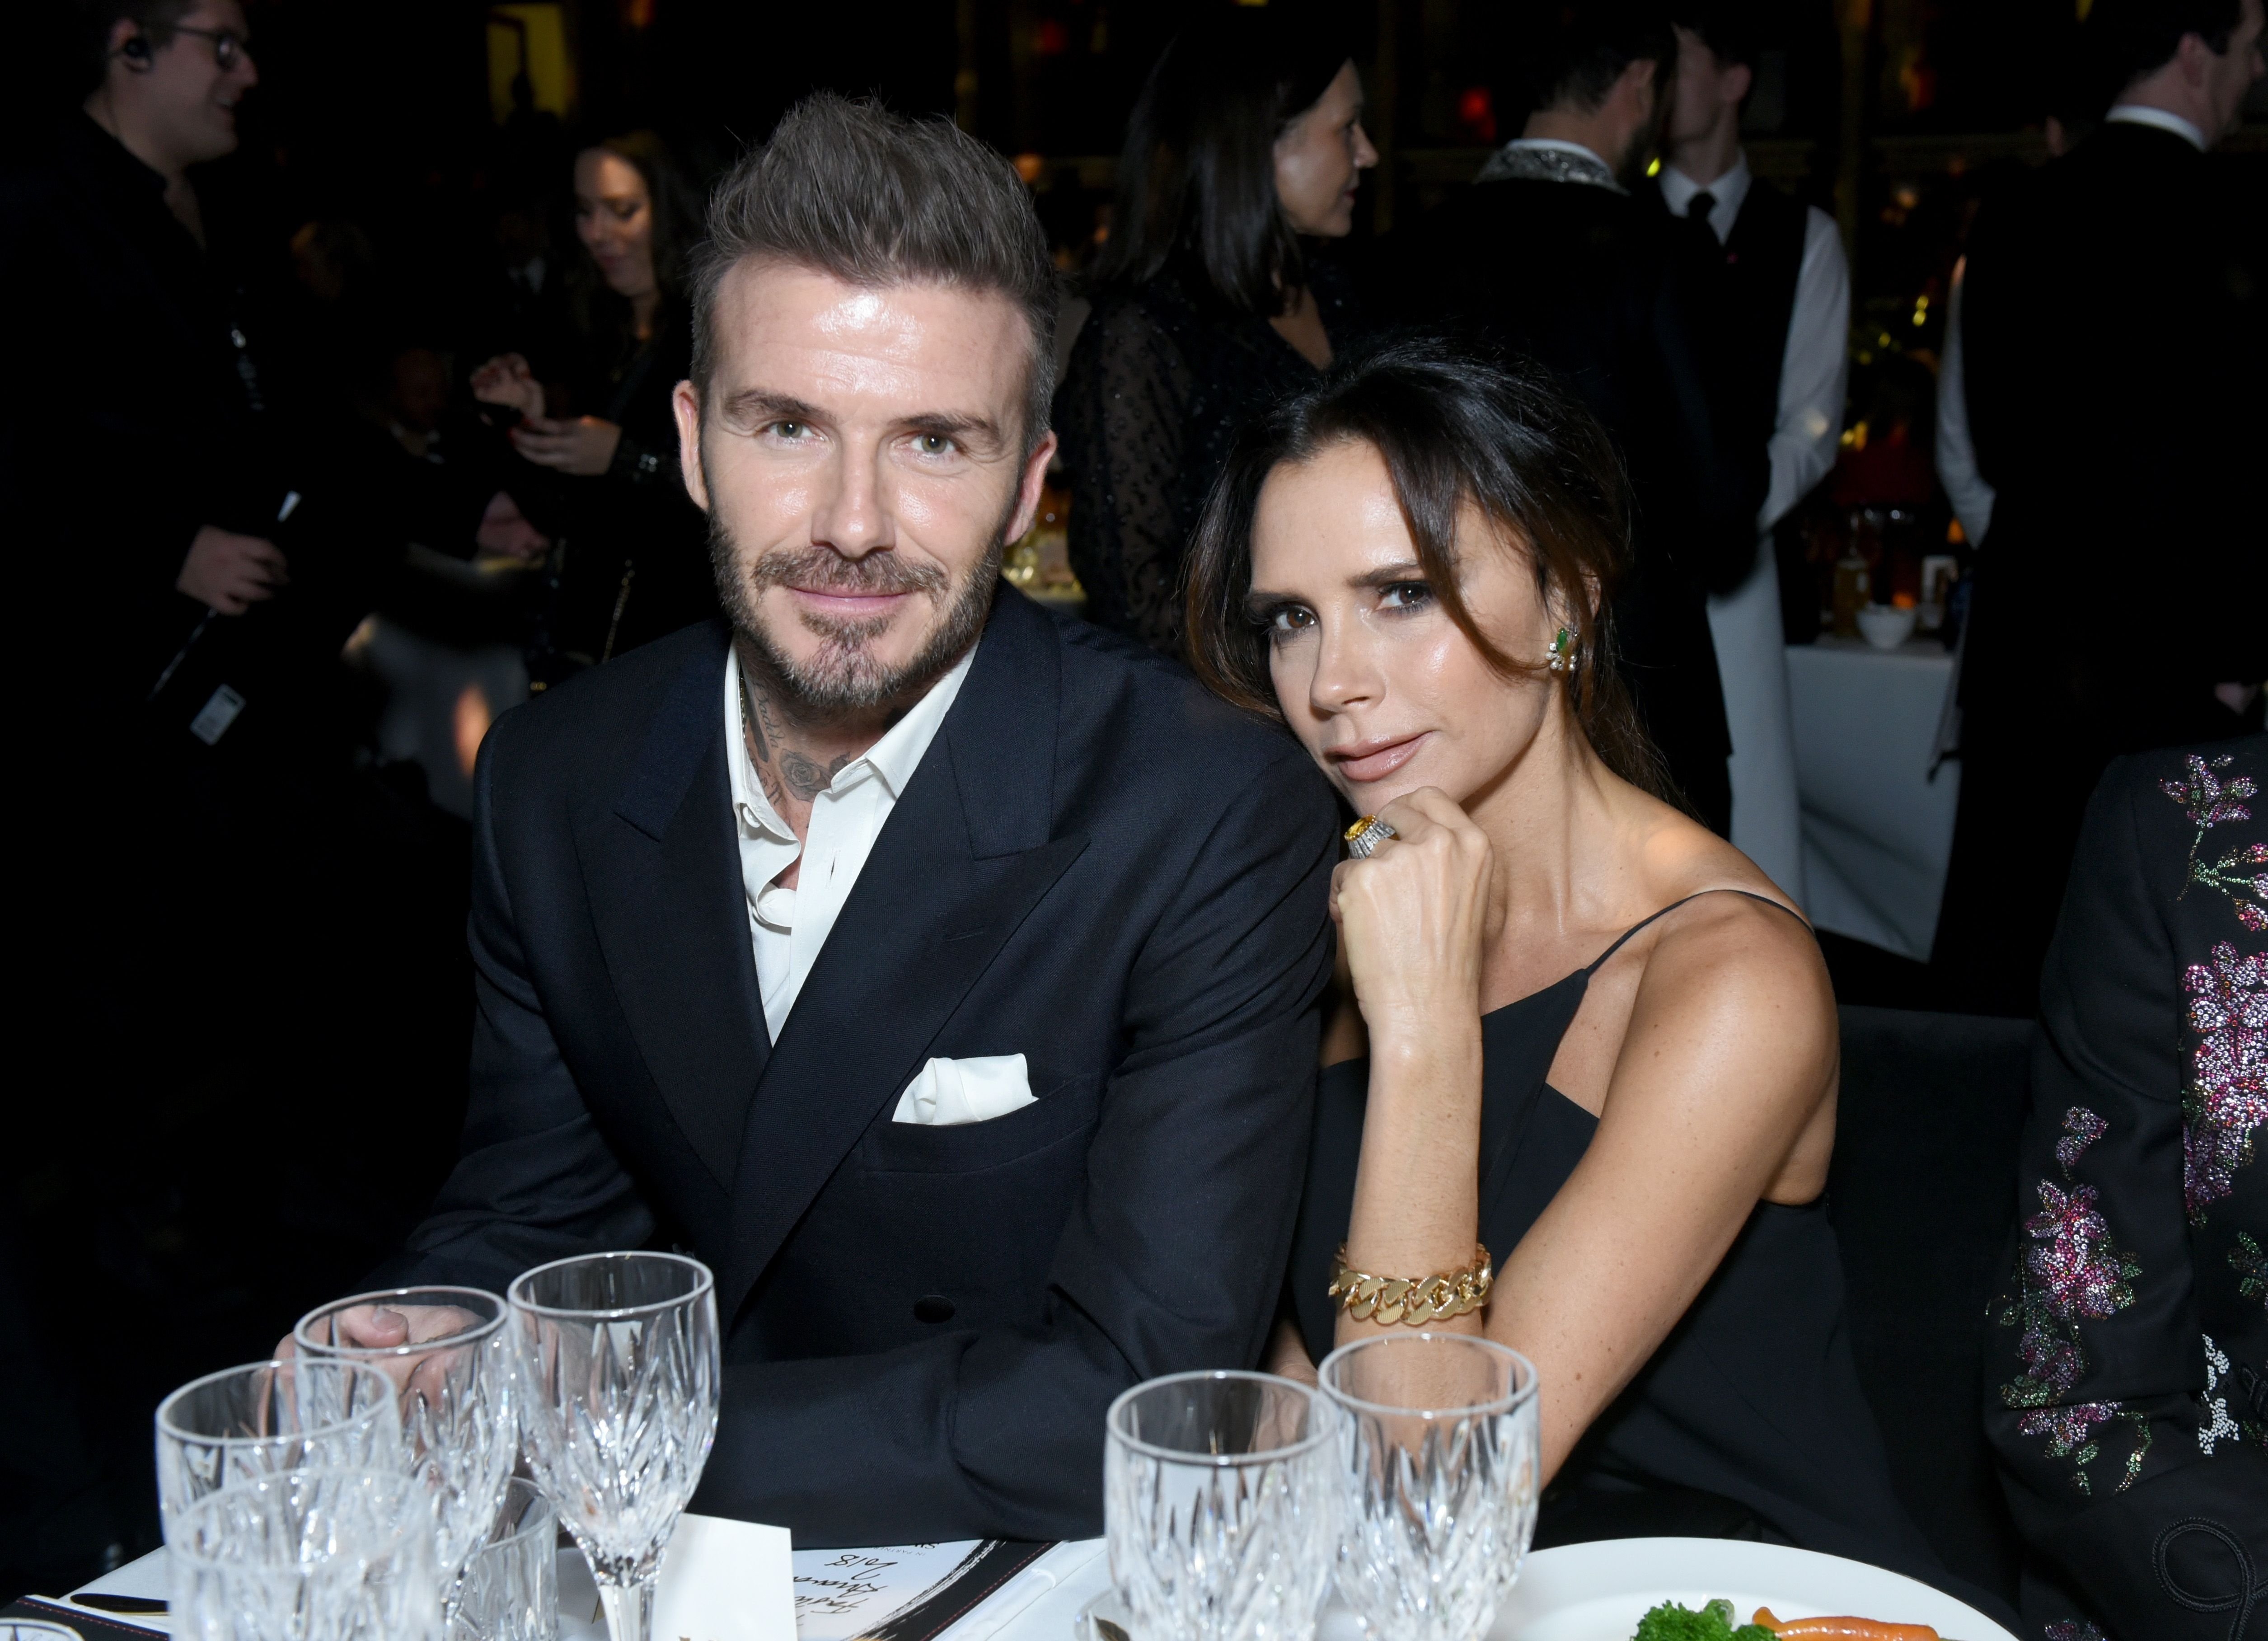  David Beckham and Victoria Beckham attend The Fashion Awards 2018 In Partnership With Swarovski at Royal Albert Hall on December 10, 2018 in London, England. | Source: Getty Images